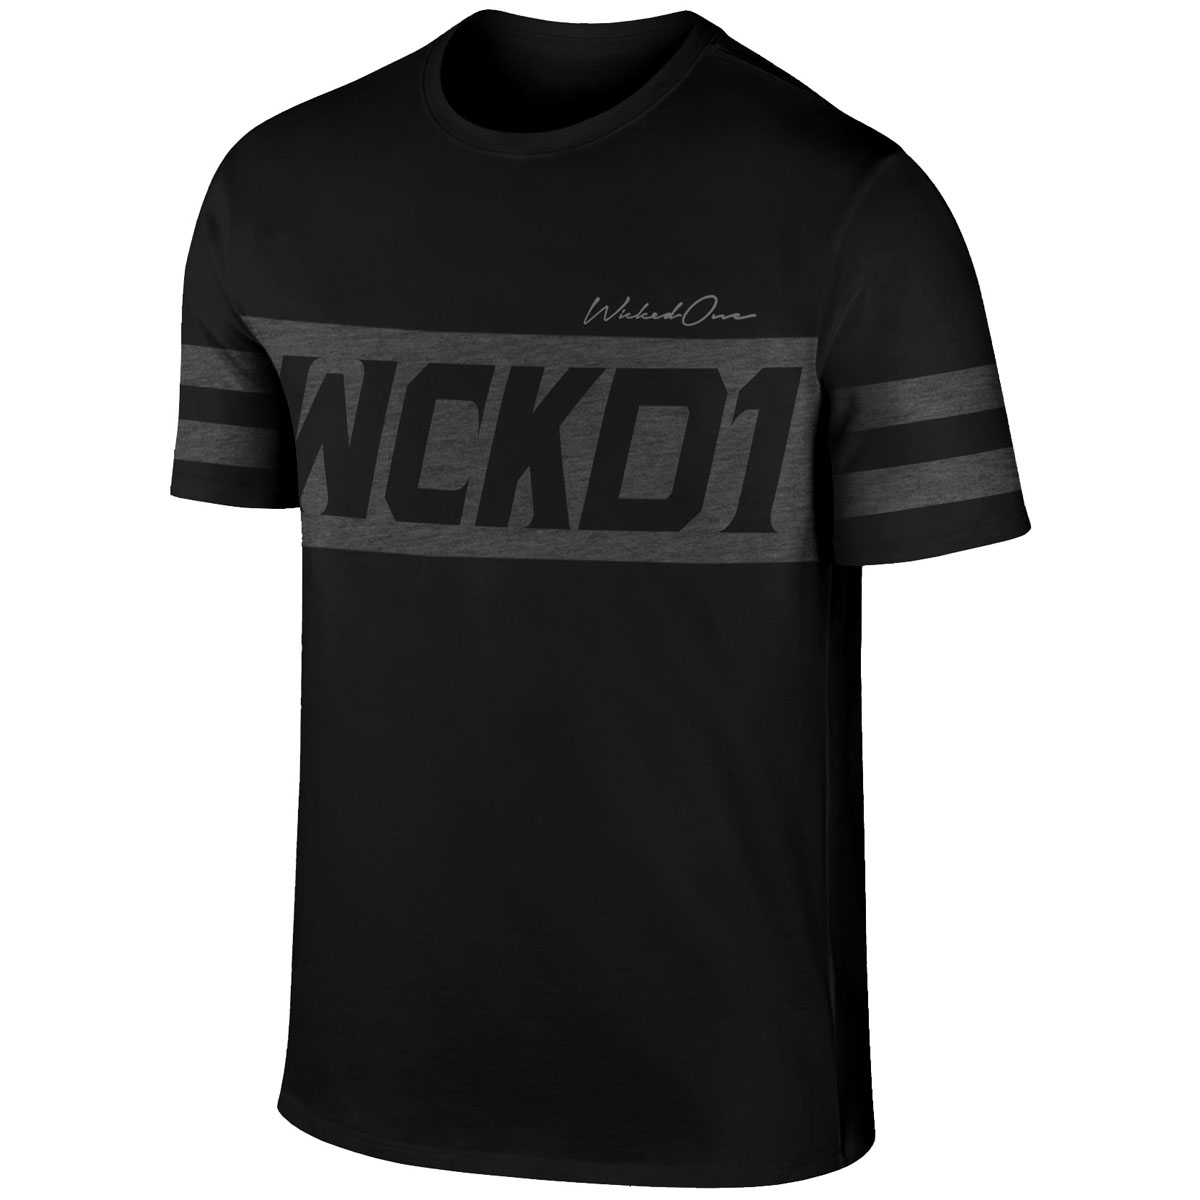 Wicked One T-Shirt, Tracker, black S